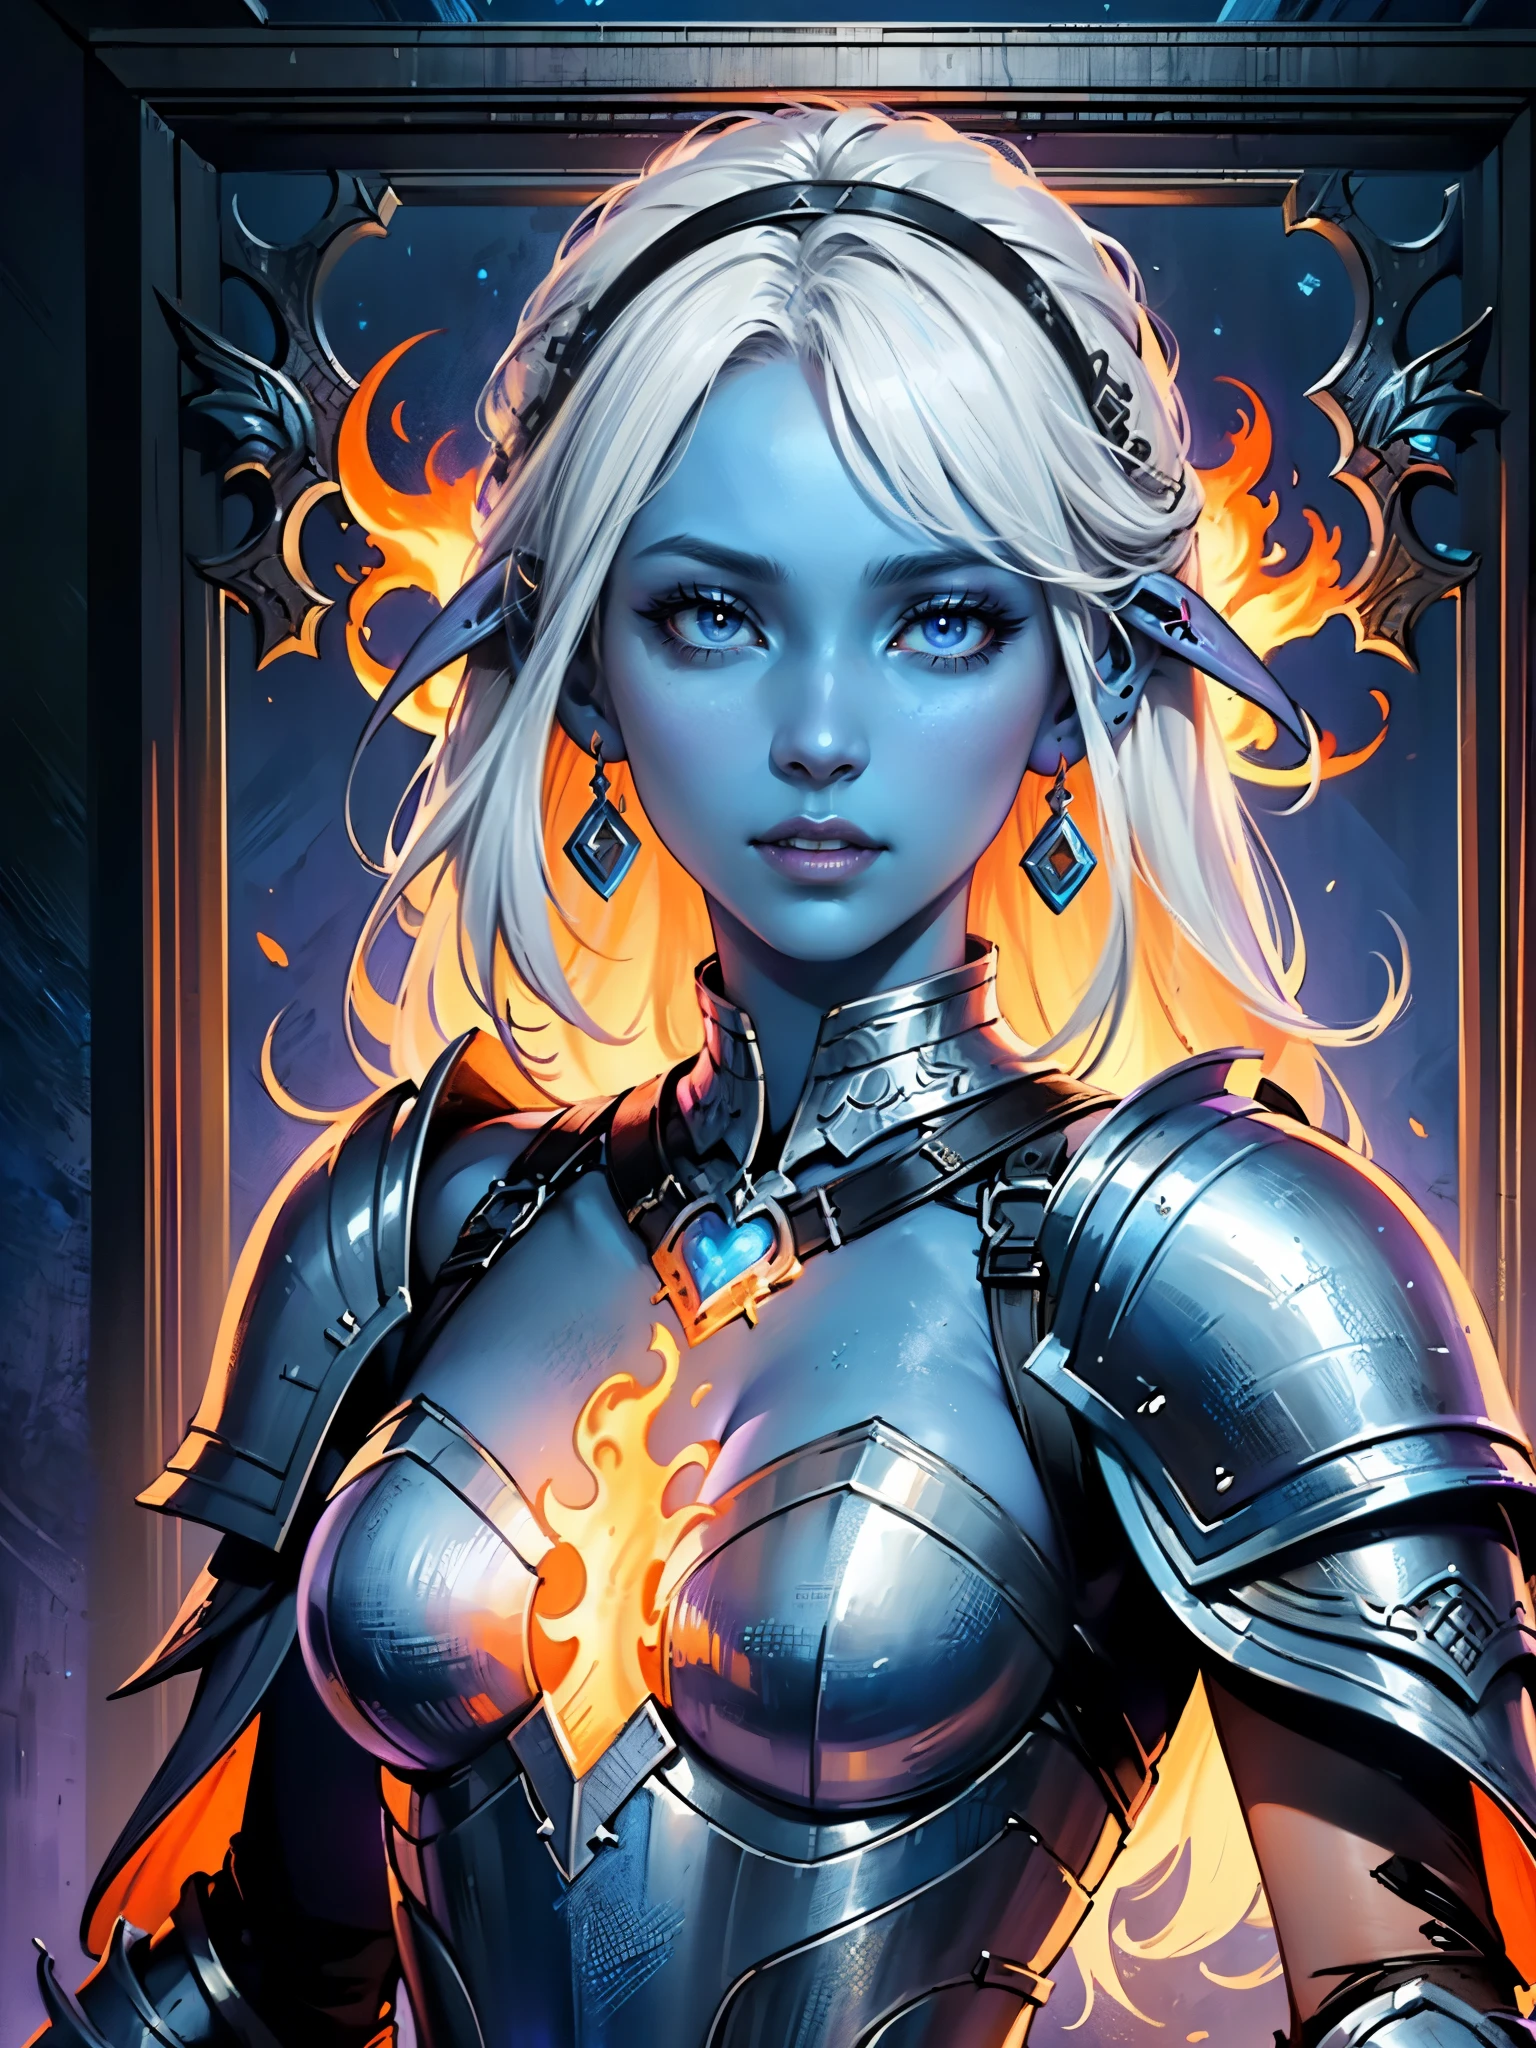 fantasy art, dnd art, RPG art, wide shot, (masterpiece: 1.4) a (portrait: 1.3) intense details, highly detailed, photorealistic, best quality, highres, portrait a female (fantasy art, Masterpiece, best quality: 1.3) ((blue skin: 1.5)), intense details facial details, exquisite beauty, (fantasy art, Masterpiece, best quality) cleric, (blue: 1.3) skinned female, (white hair: 1.4), long hair, (hair hides ears: 1.5), (purple eyes: 1.3), fantasy art, Masterpiece, best quality) armed a fiery sword red fire, wearing heavy (white: 1.3) half plate mail armor, wearing high heeled laced boots, wearing an(orange :1.3) cloak, wearing glowing holy symbol GlowingRunes_yellow, within fantasy temple background, reflection light, high details, best quality, 16k, [ultra detailed], masterpiece, best quality, (extremely detailed), close up, ultra wide shot, photorealistic, RAW, fantasy art, dnd art, fantasy art, realistic art,((best quality)), ((masterpiece)), (detailed), perfect face,